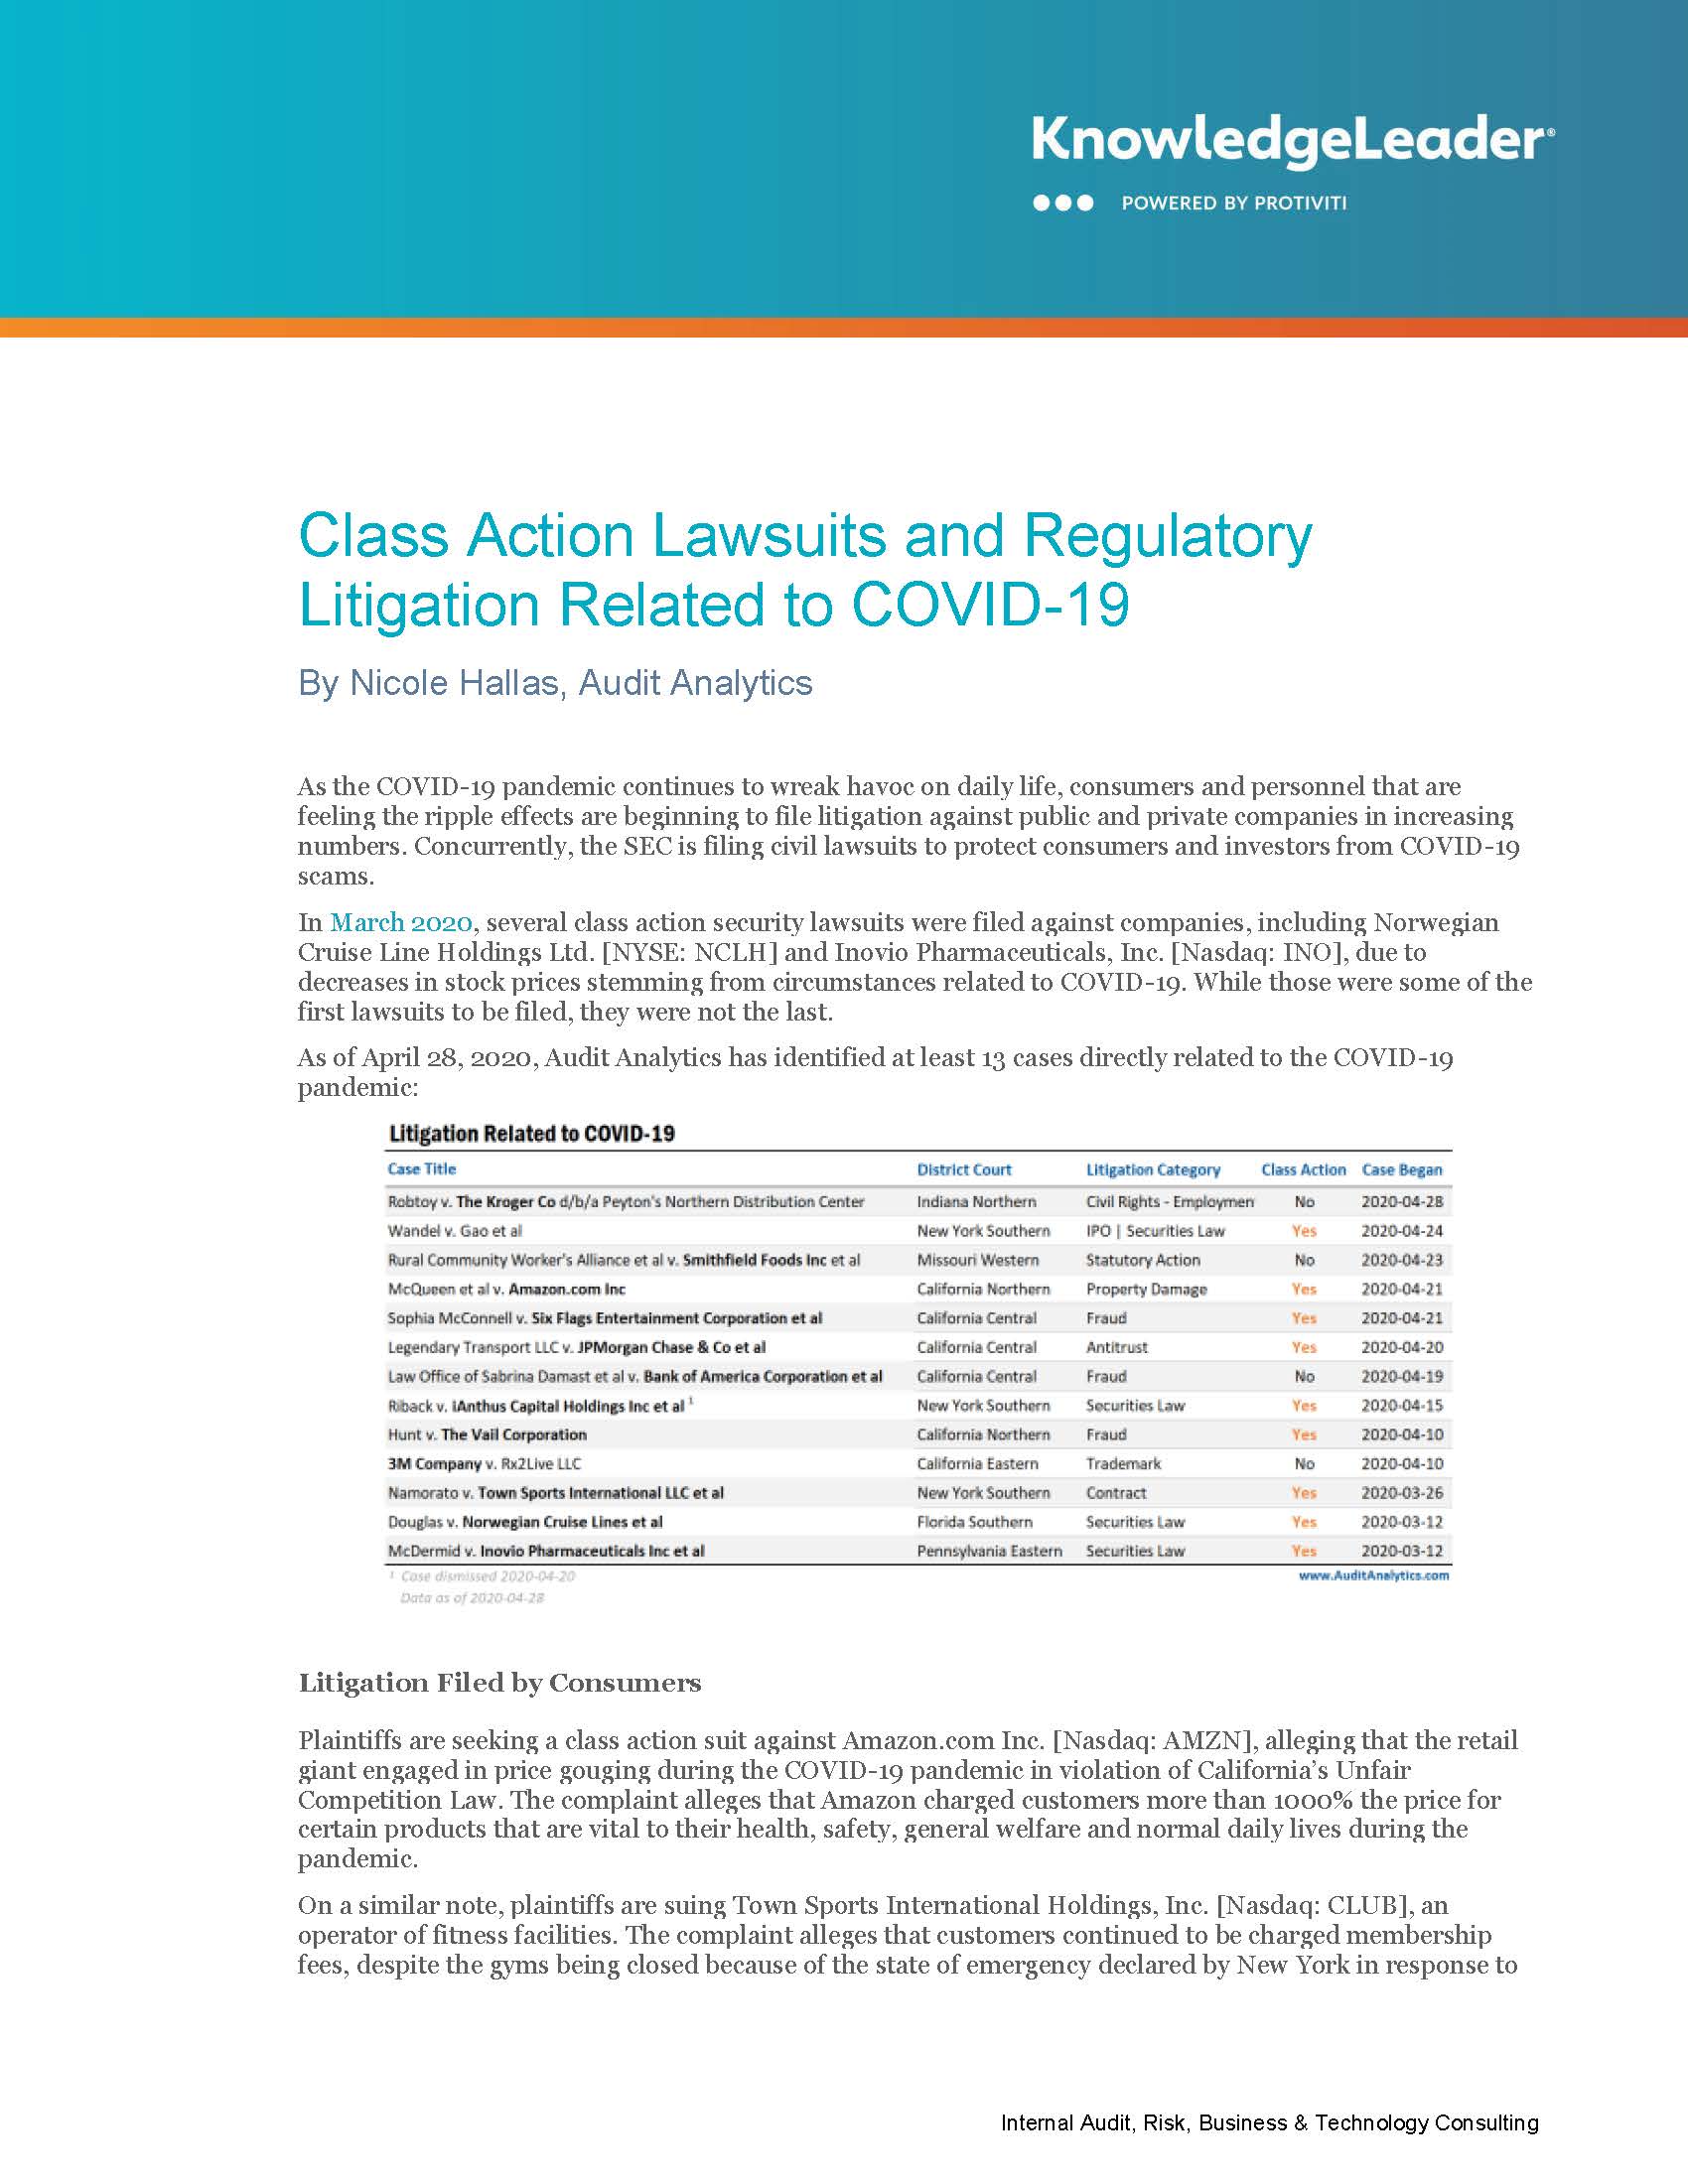 Screenshot of the first page of Class Action Lawsuits and Regulatory Litigation Related to COVID-19